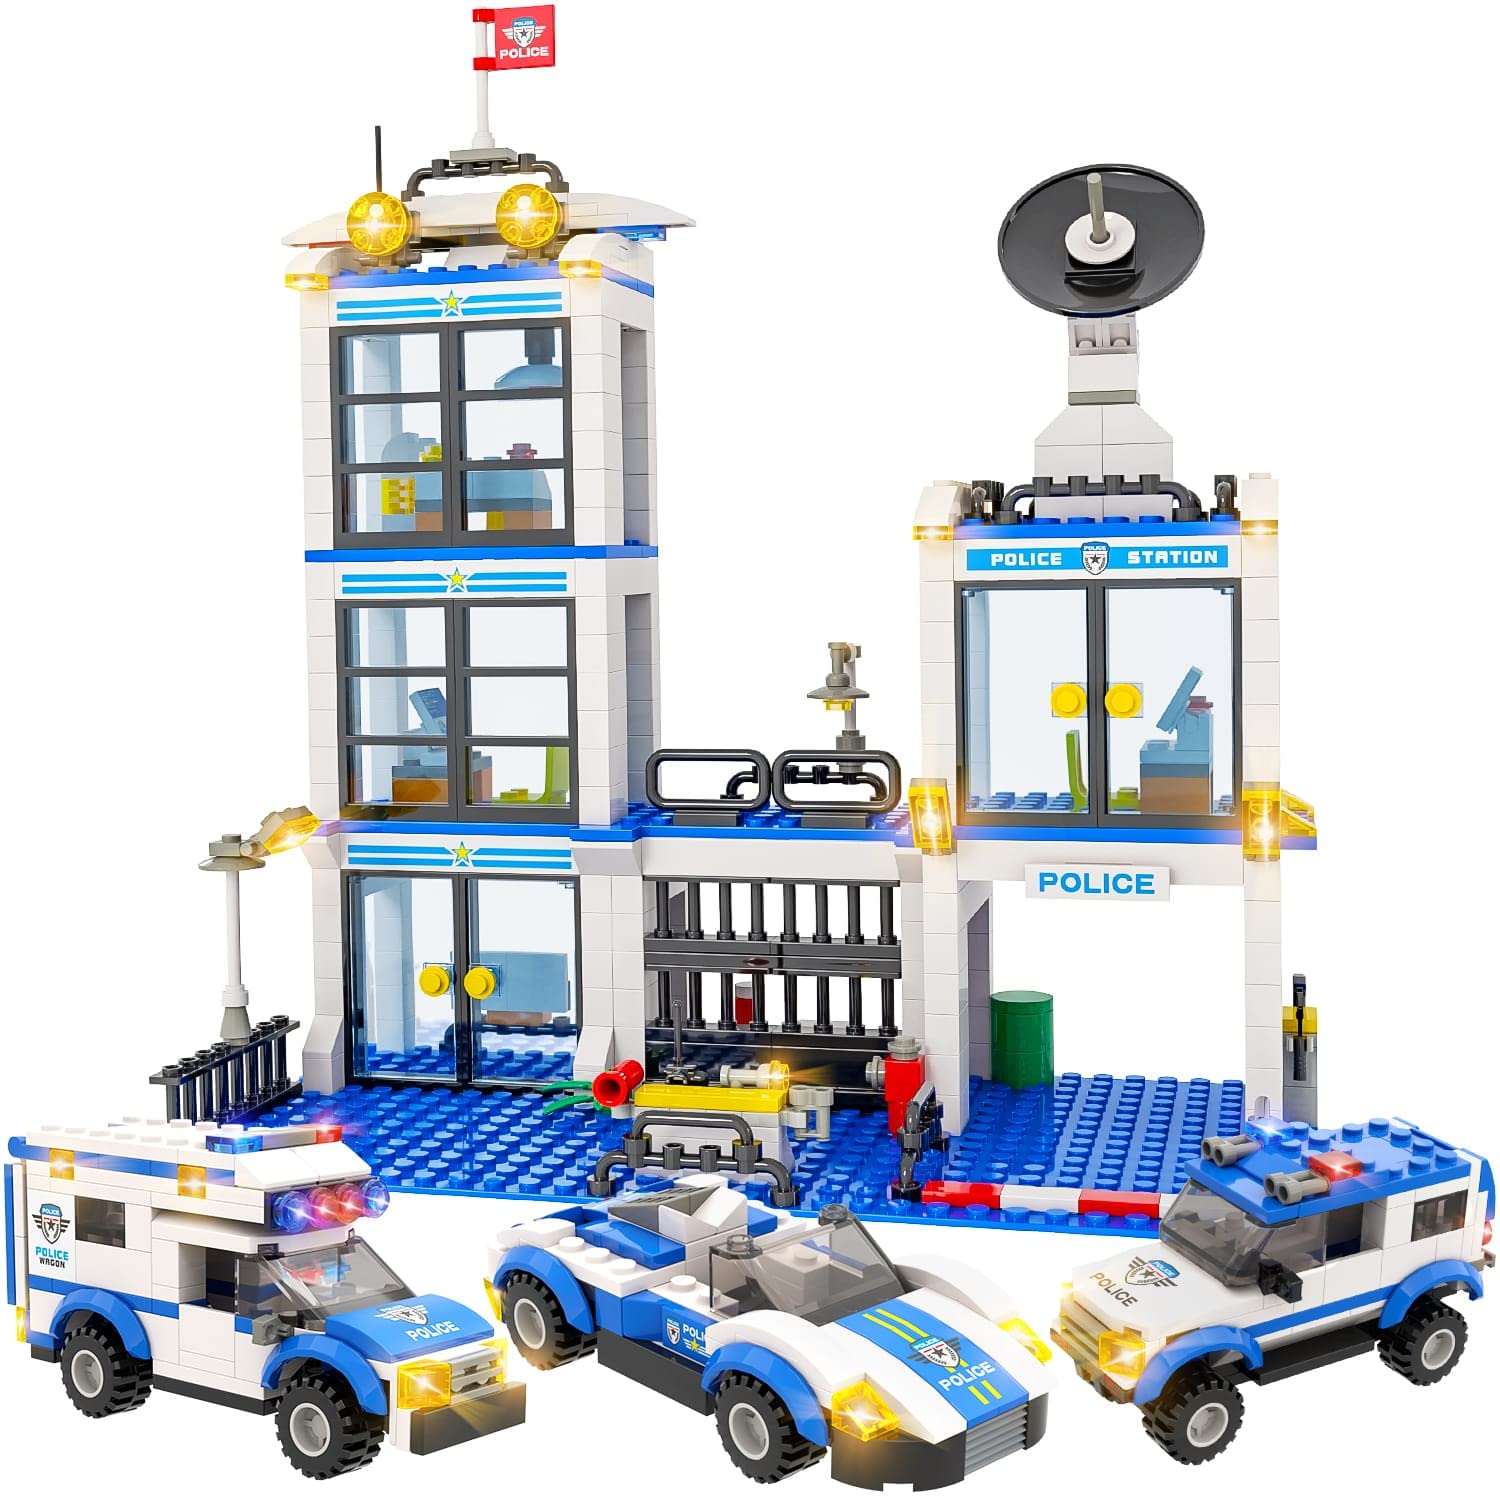 City Police Station Building Kit, Police Car Toy, City Police Sets, with Escort Car, Prison Van, Cruiser, Best Learning Roleplay STEM Police Toys Birthday for Kids Boys Aged 6-12